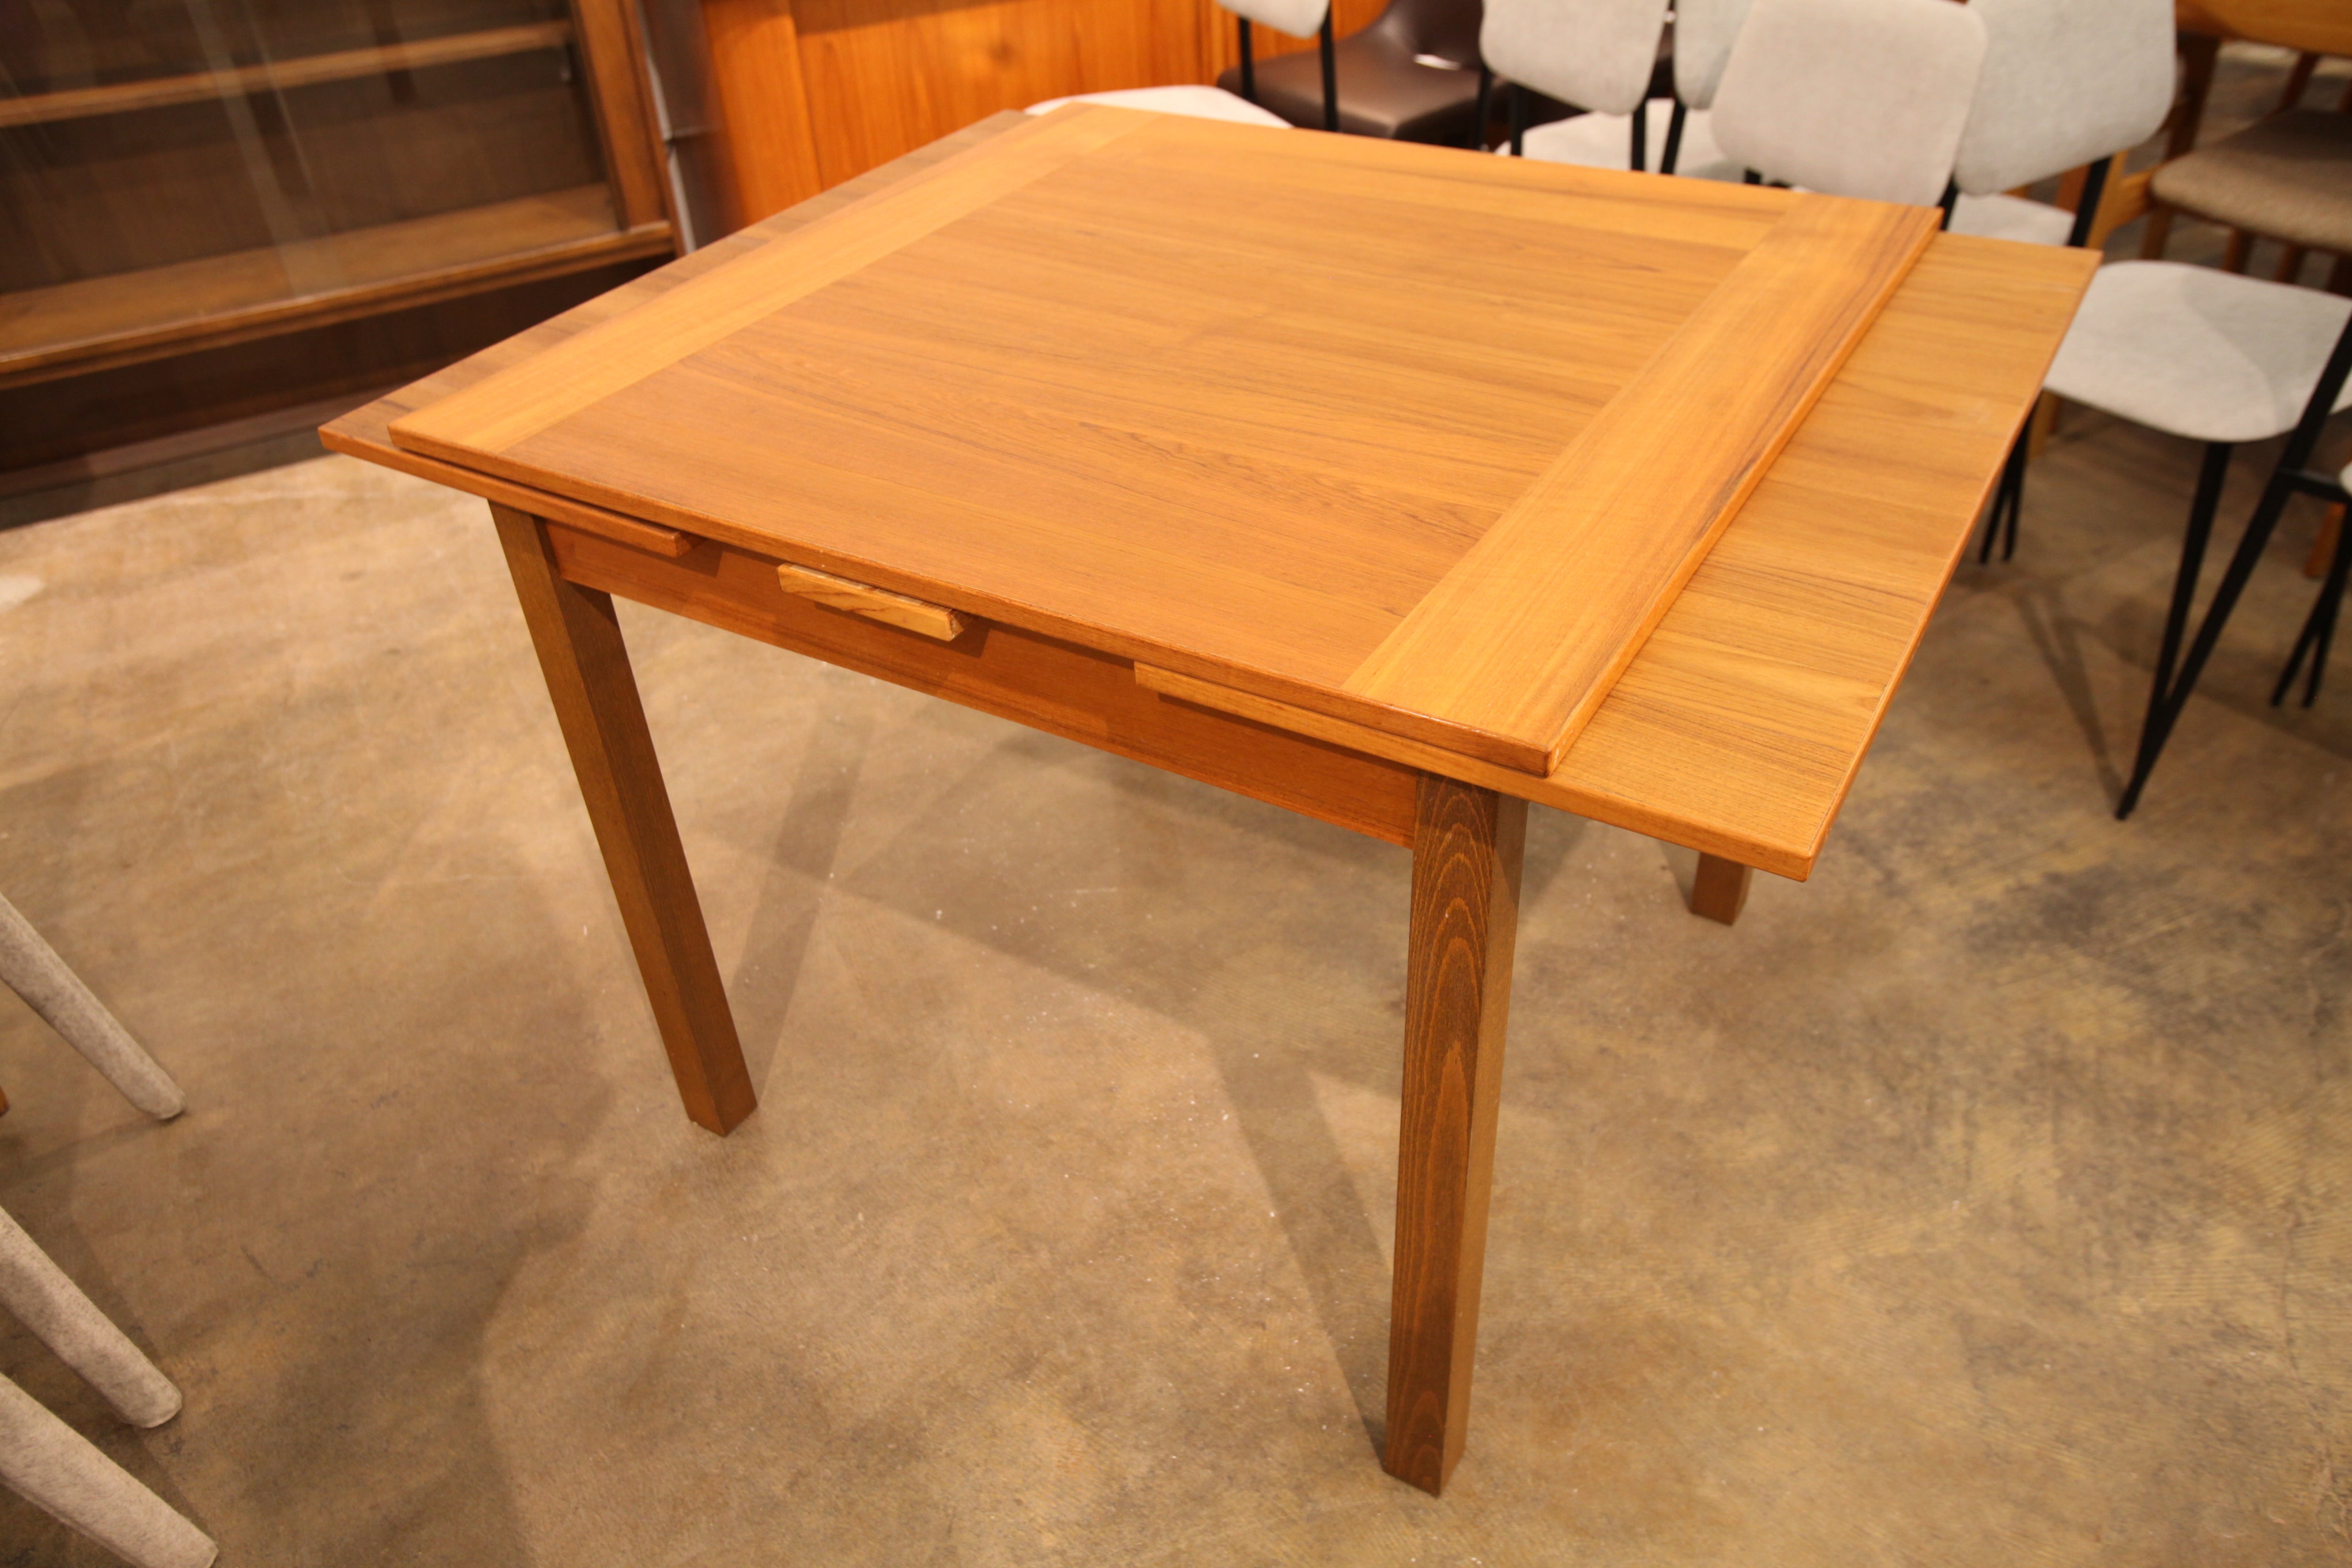 Vintage Small Square Teak Dining Table w/ Extensions (35.5" x 35.5")(65.5" x 35.5")